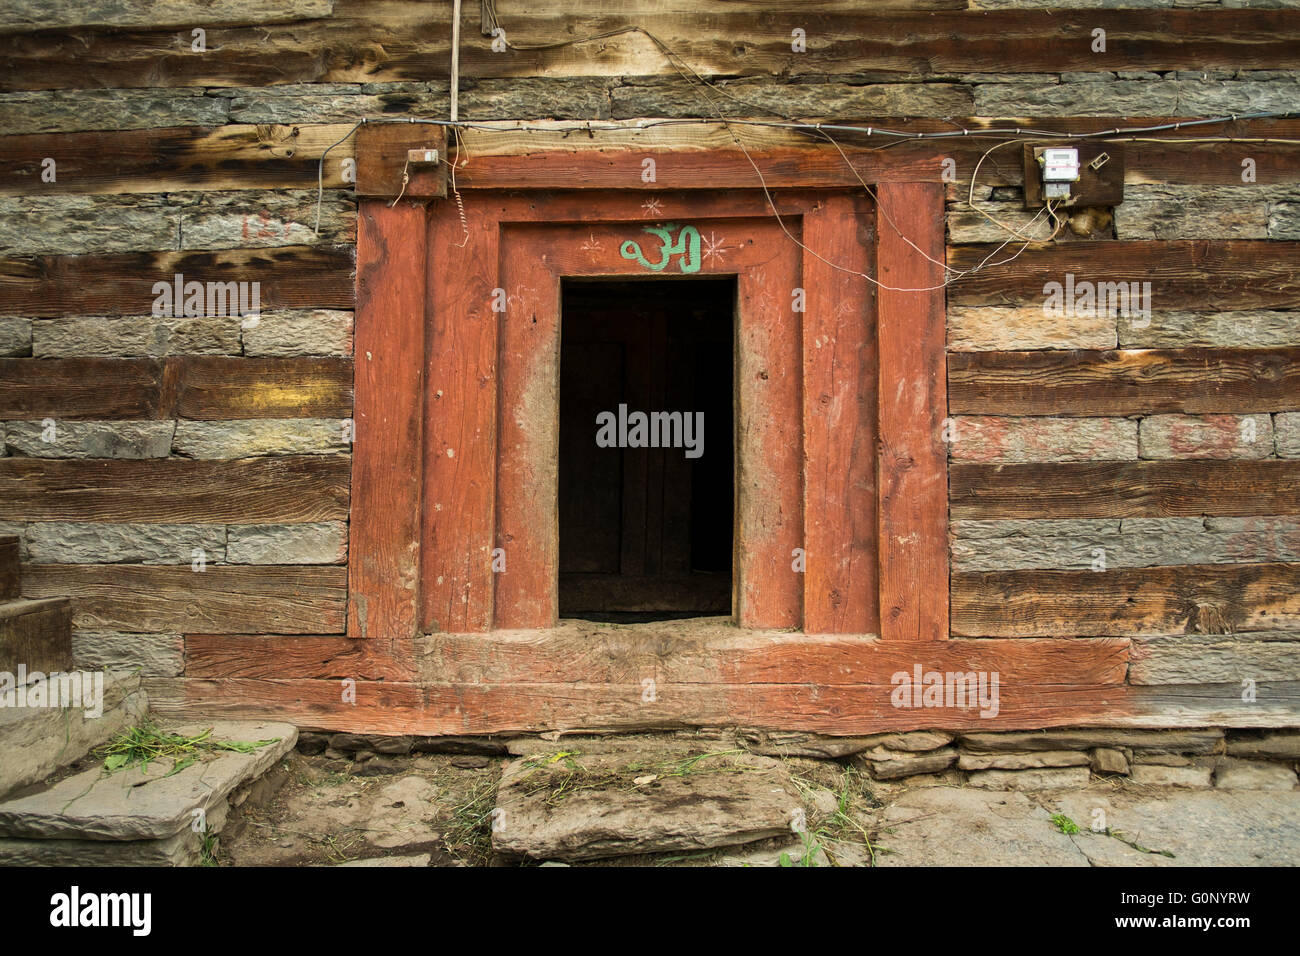 A traditional door at a Himalayan home showing an indigenous architectural style Stock Photo